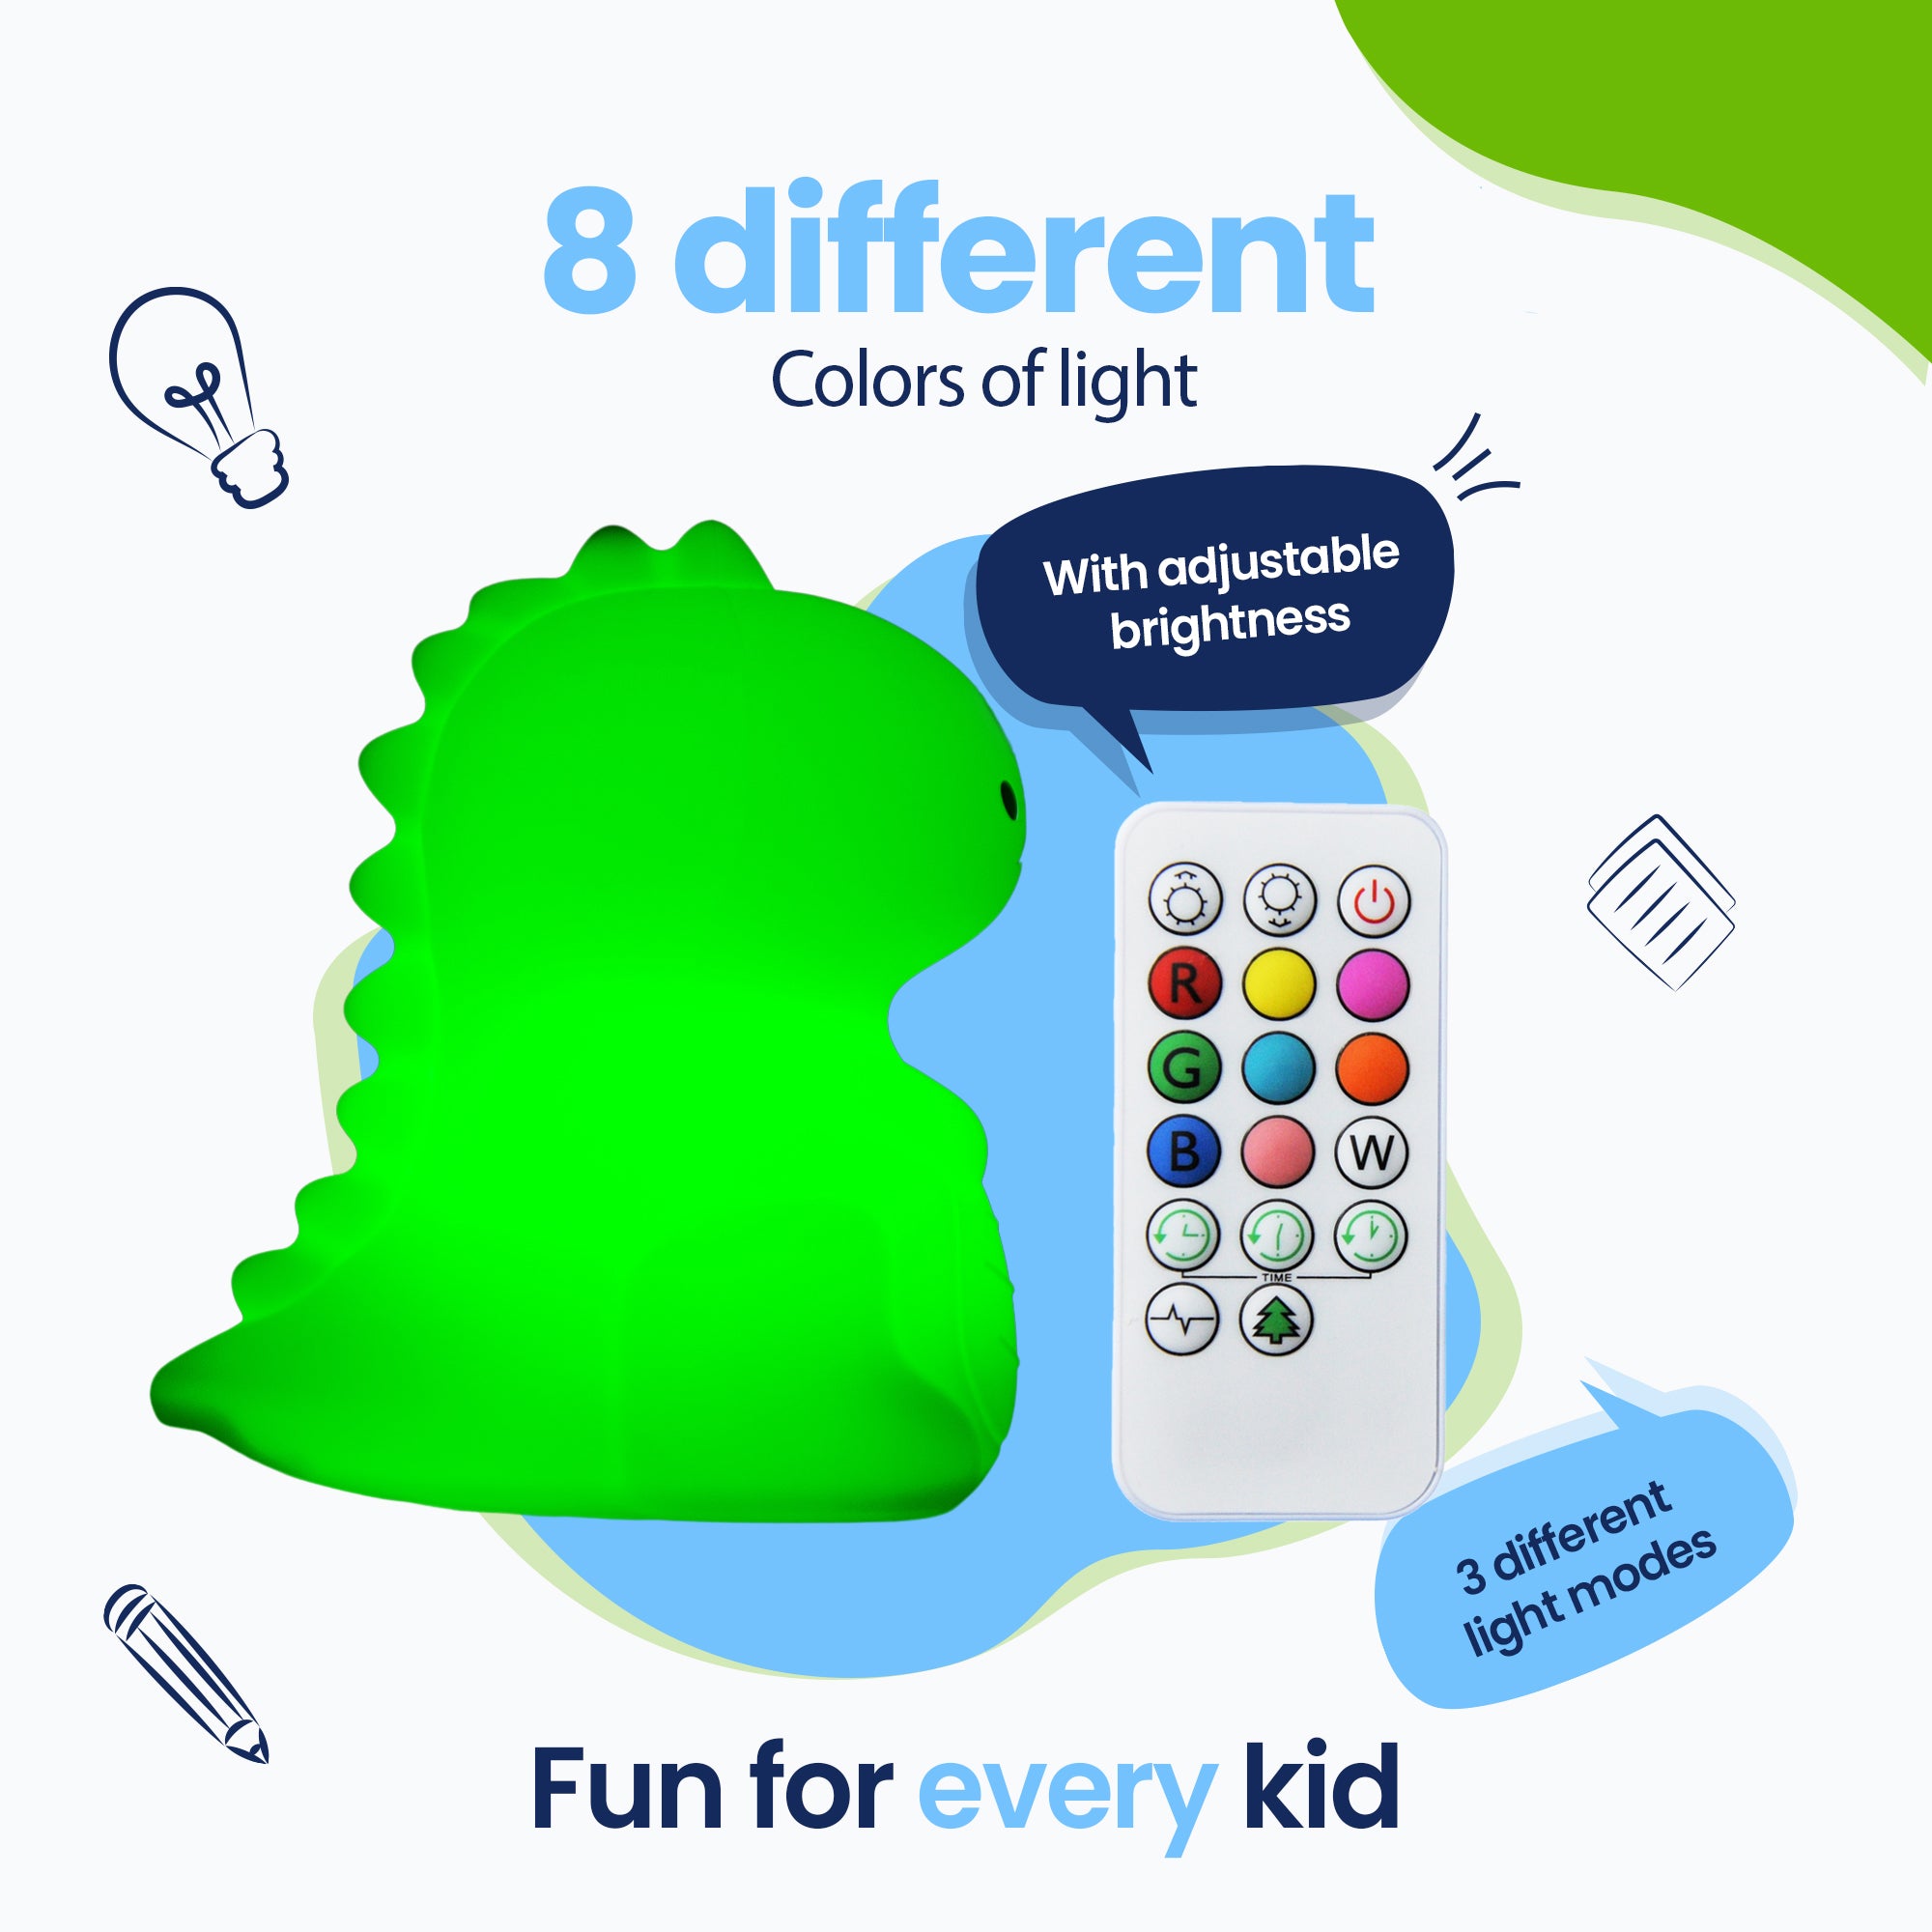 8 Different colors of light - 3 different light modes - Fun for every child